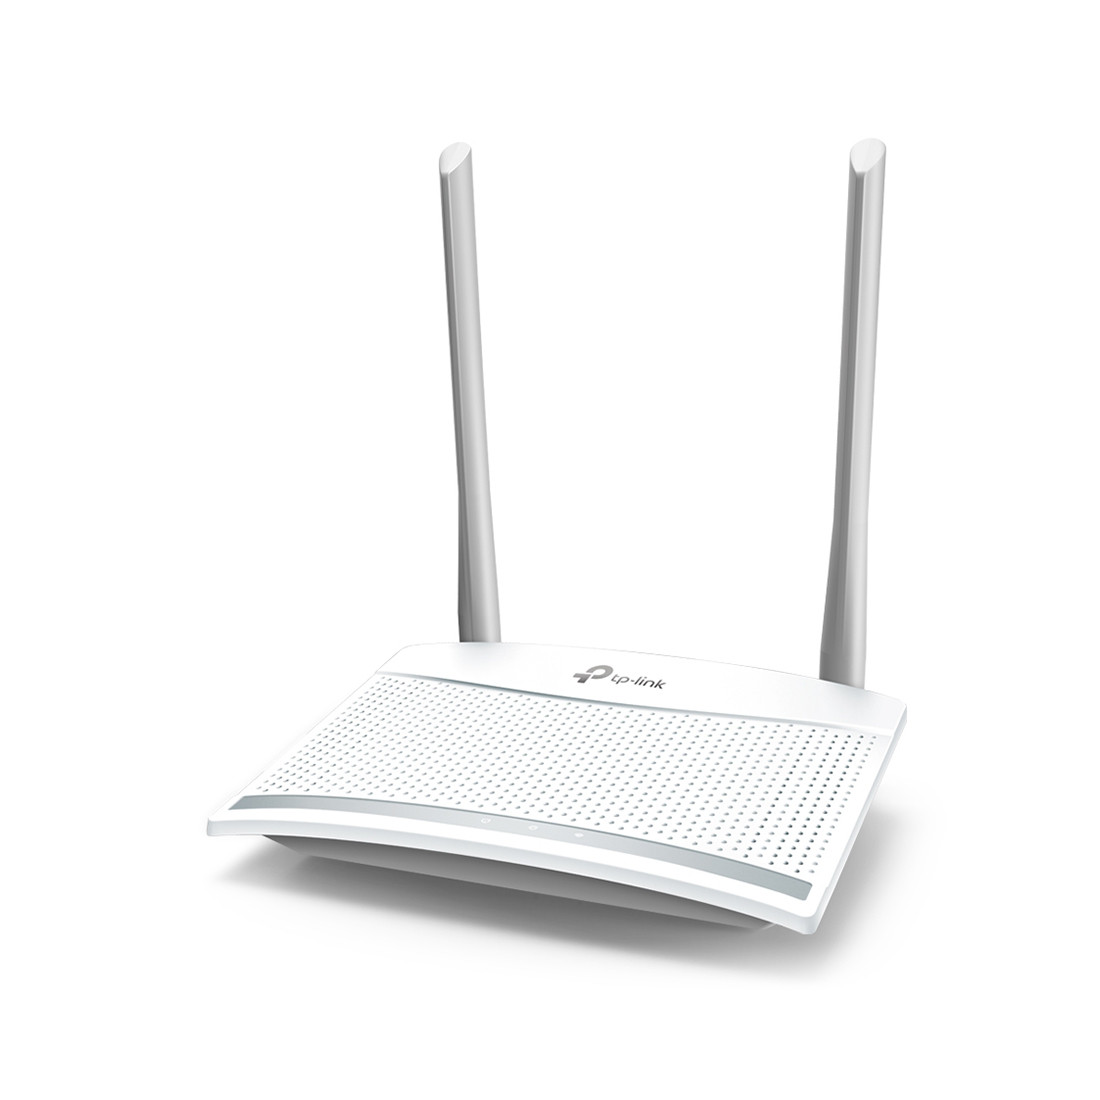 Маршрутизатор TP-Link TL-WR820N 2-004096